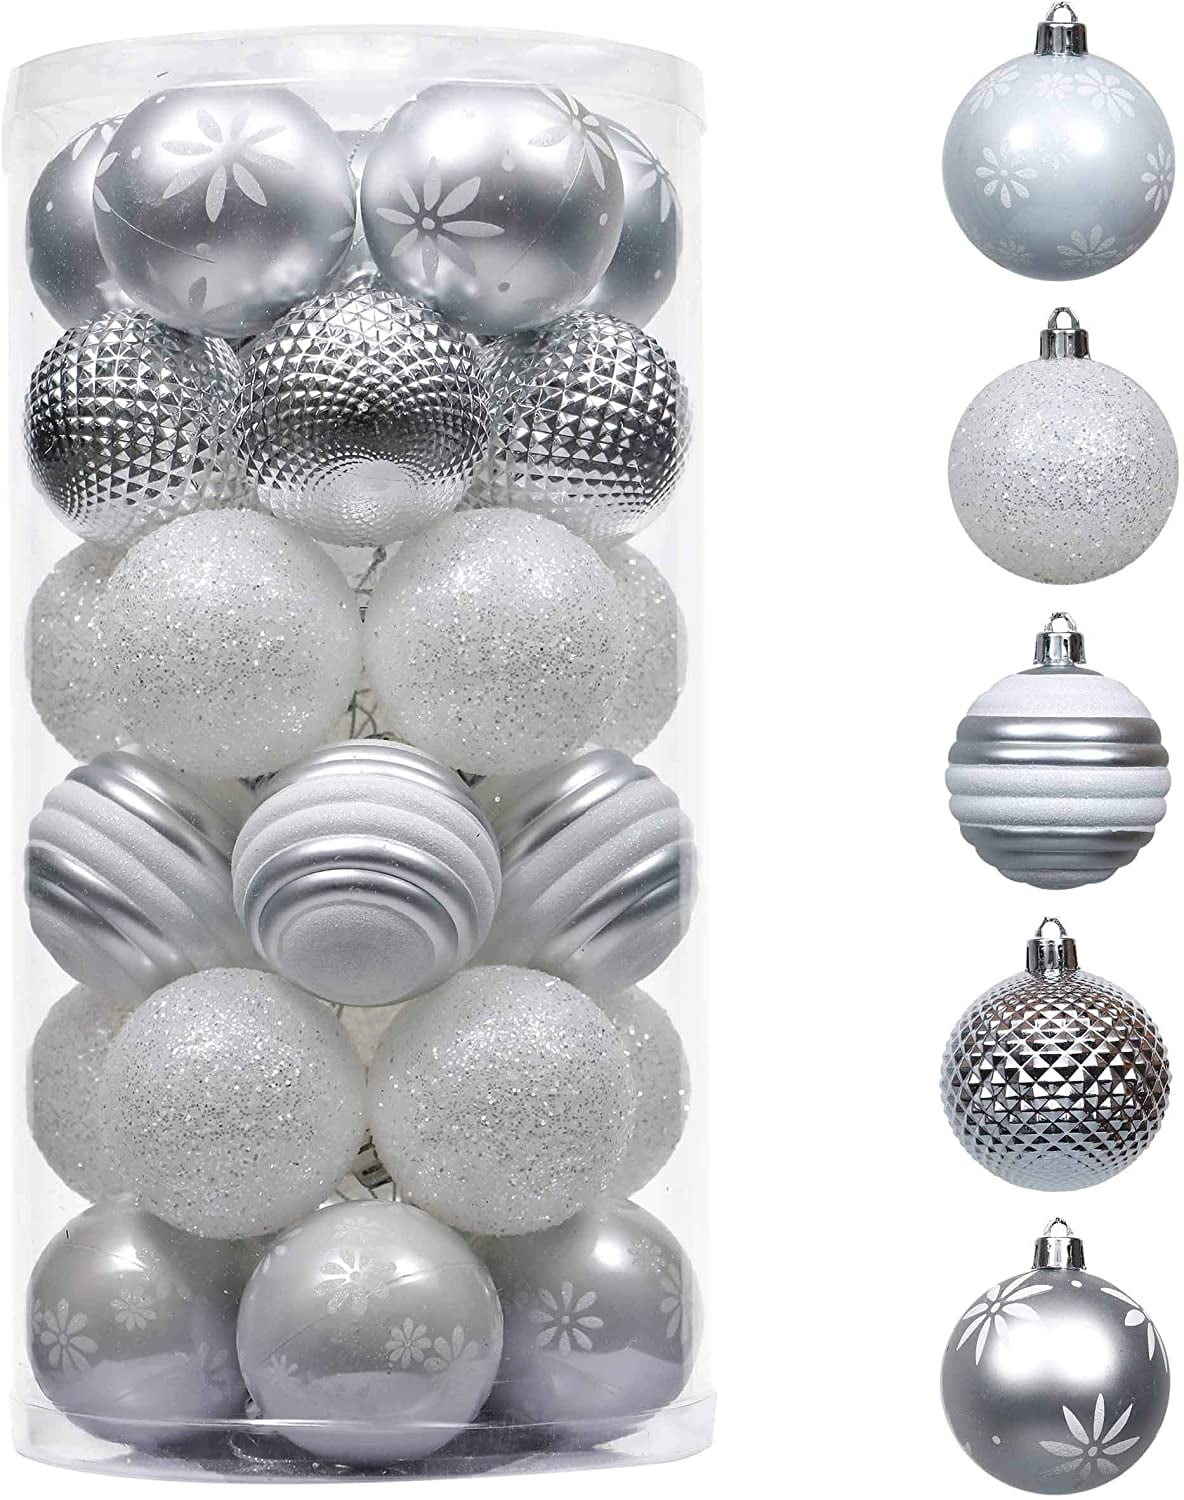 Shatterproof Christmas Tree Ornaments for Xmas Decoration Valery Madelyn 70ct Frozen Winter Grey Silver Christmas Ball Ornaments Decor 